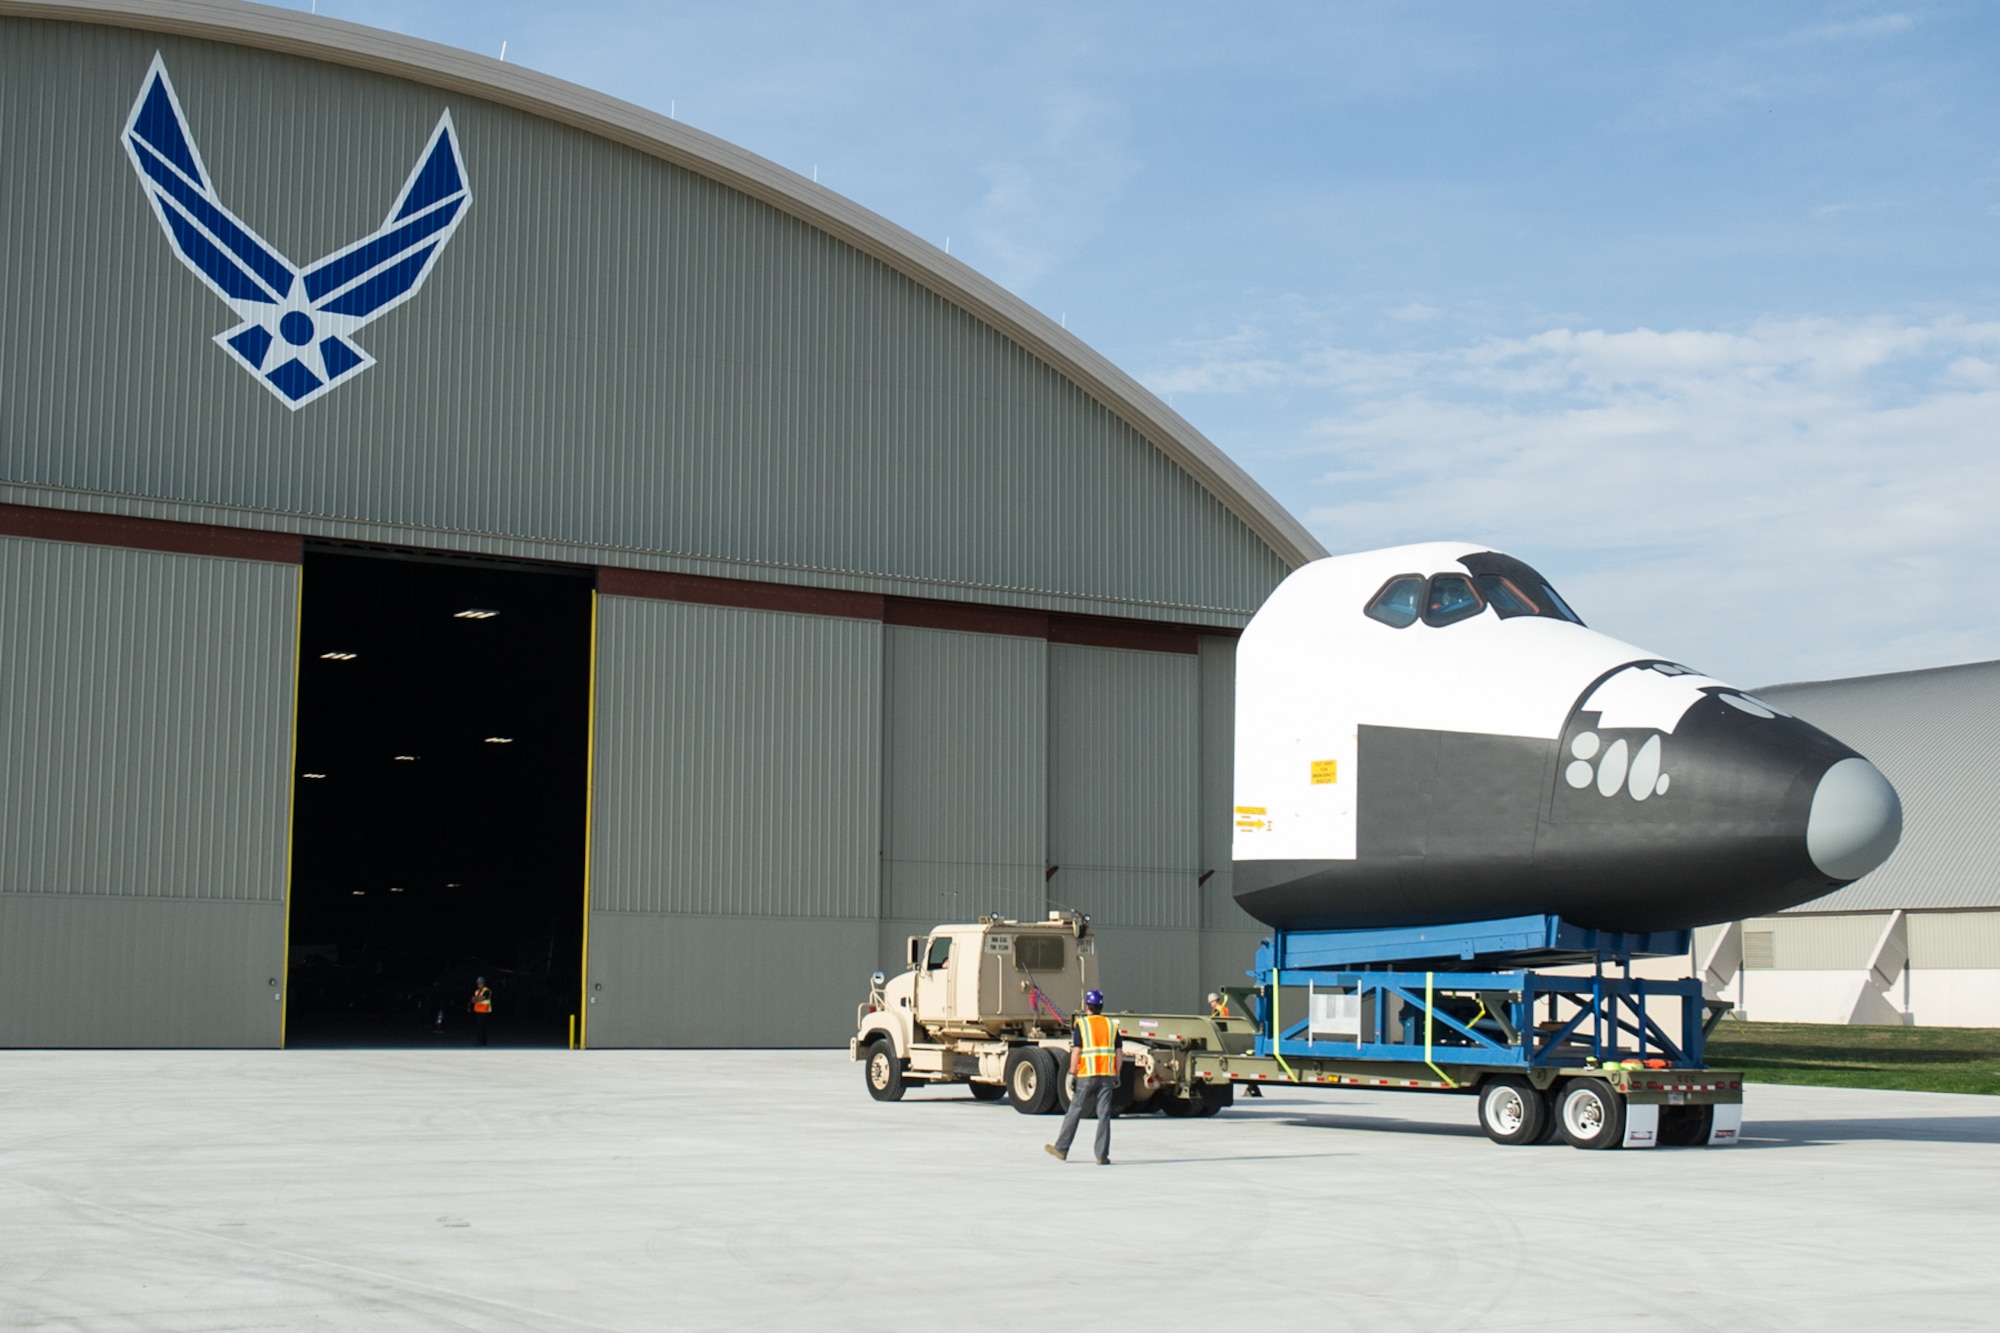 DAYTON, Ohio -- Restoration staff move the Space Shuttle Exhibit(CCT) into the new fourth building at the National Museum of the U.S. Air Force on Oct. 22, 2015. (U.S. Air Force photo)